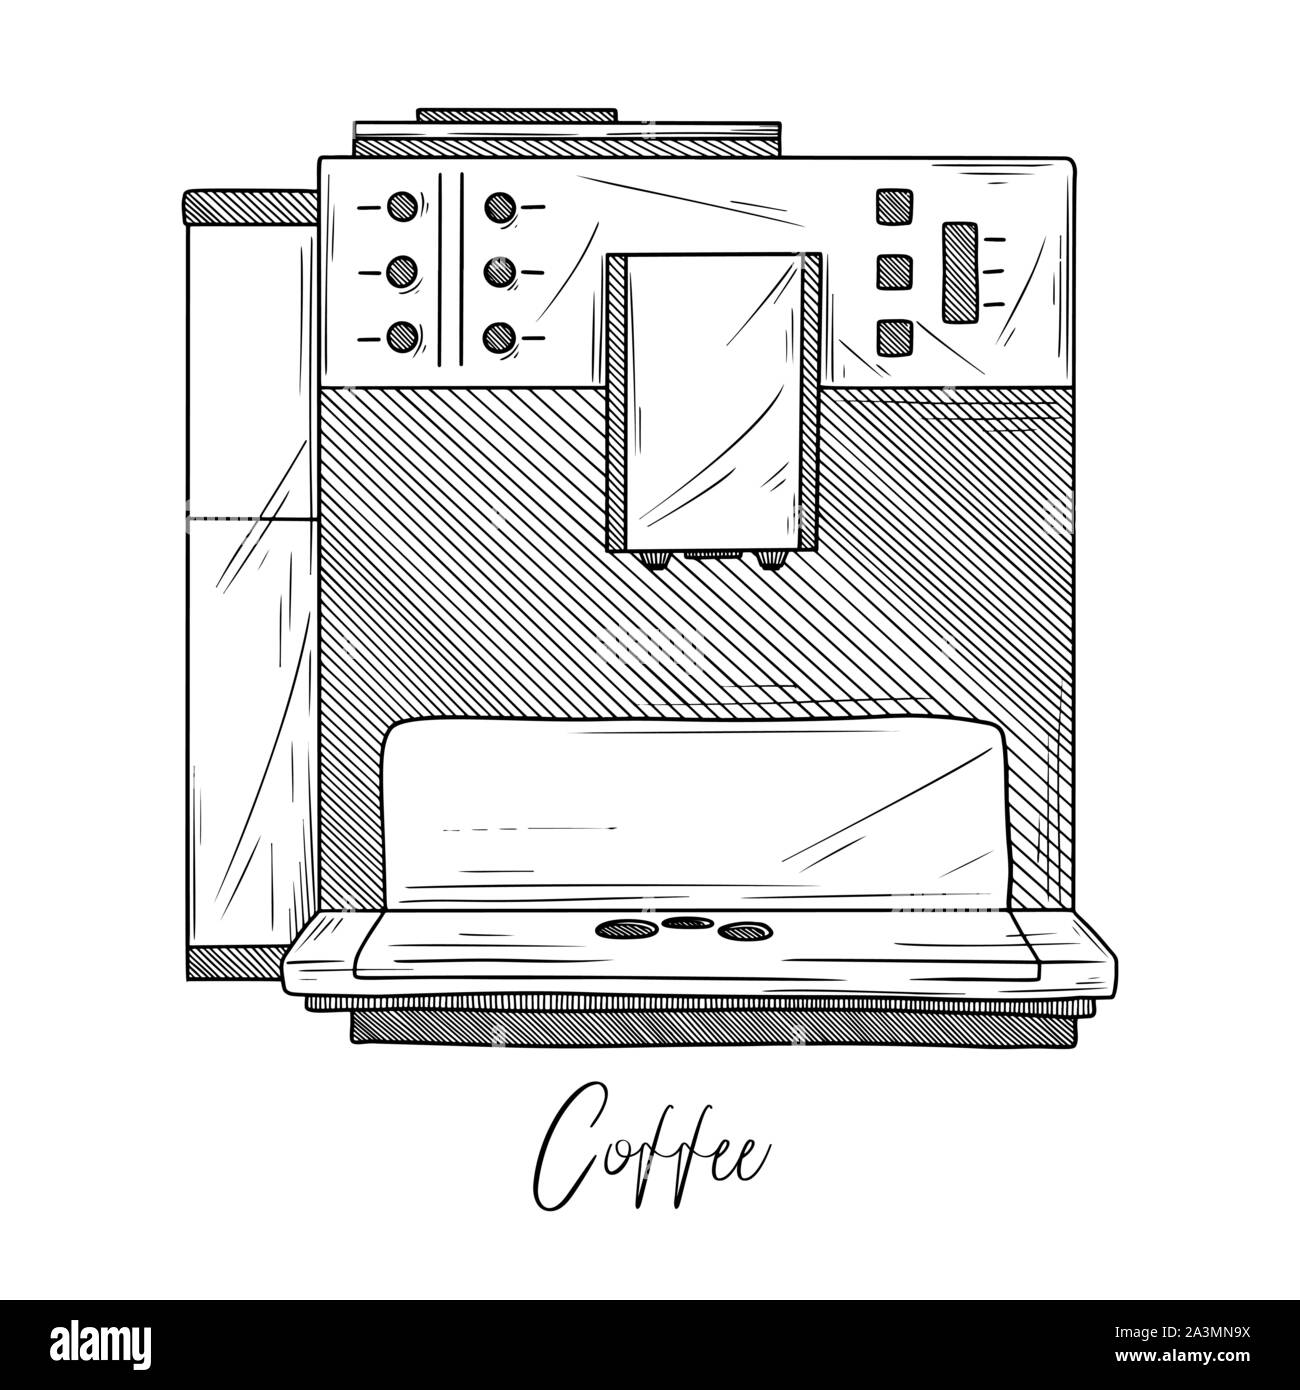 Sketch of coffee maker isolated on white background. Vector illustration in sketch style. Stock Vector